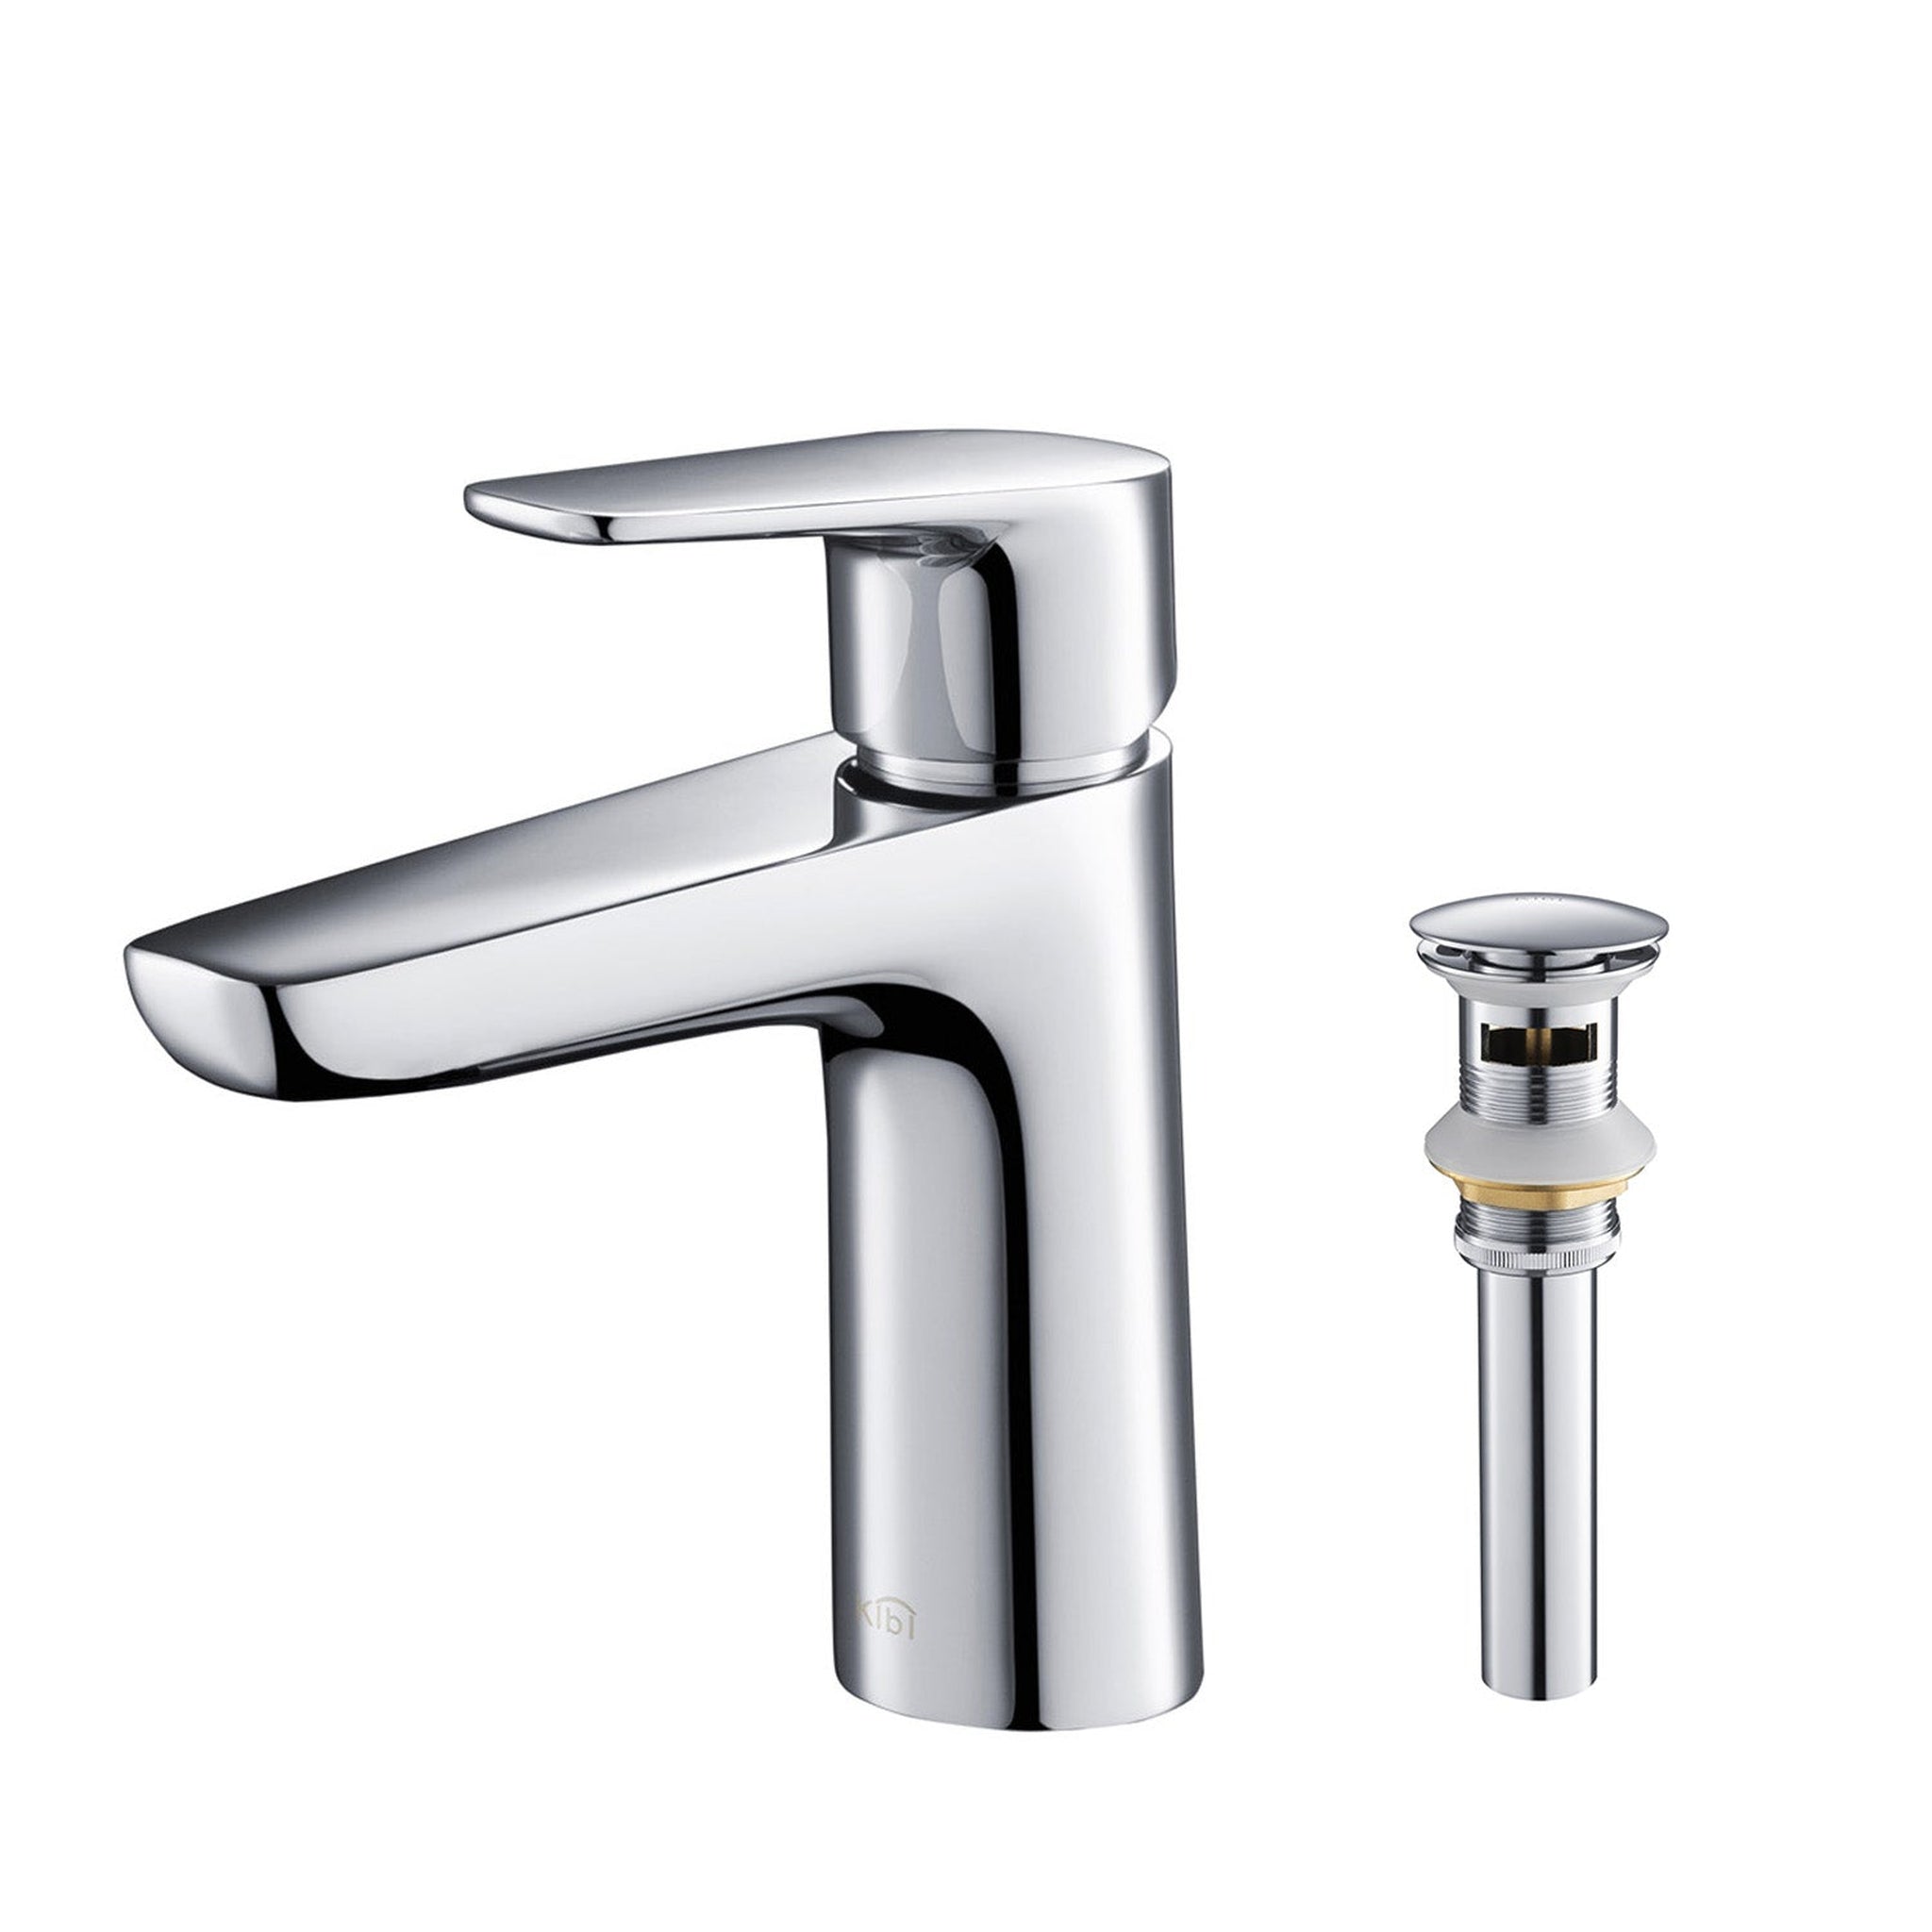 KIBI, KIBI Harmony Single Handle Chrome Solid Brass Bathroom Sink Faucet With Pop-Up Drain Stopper Small Cover With Overflow